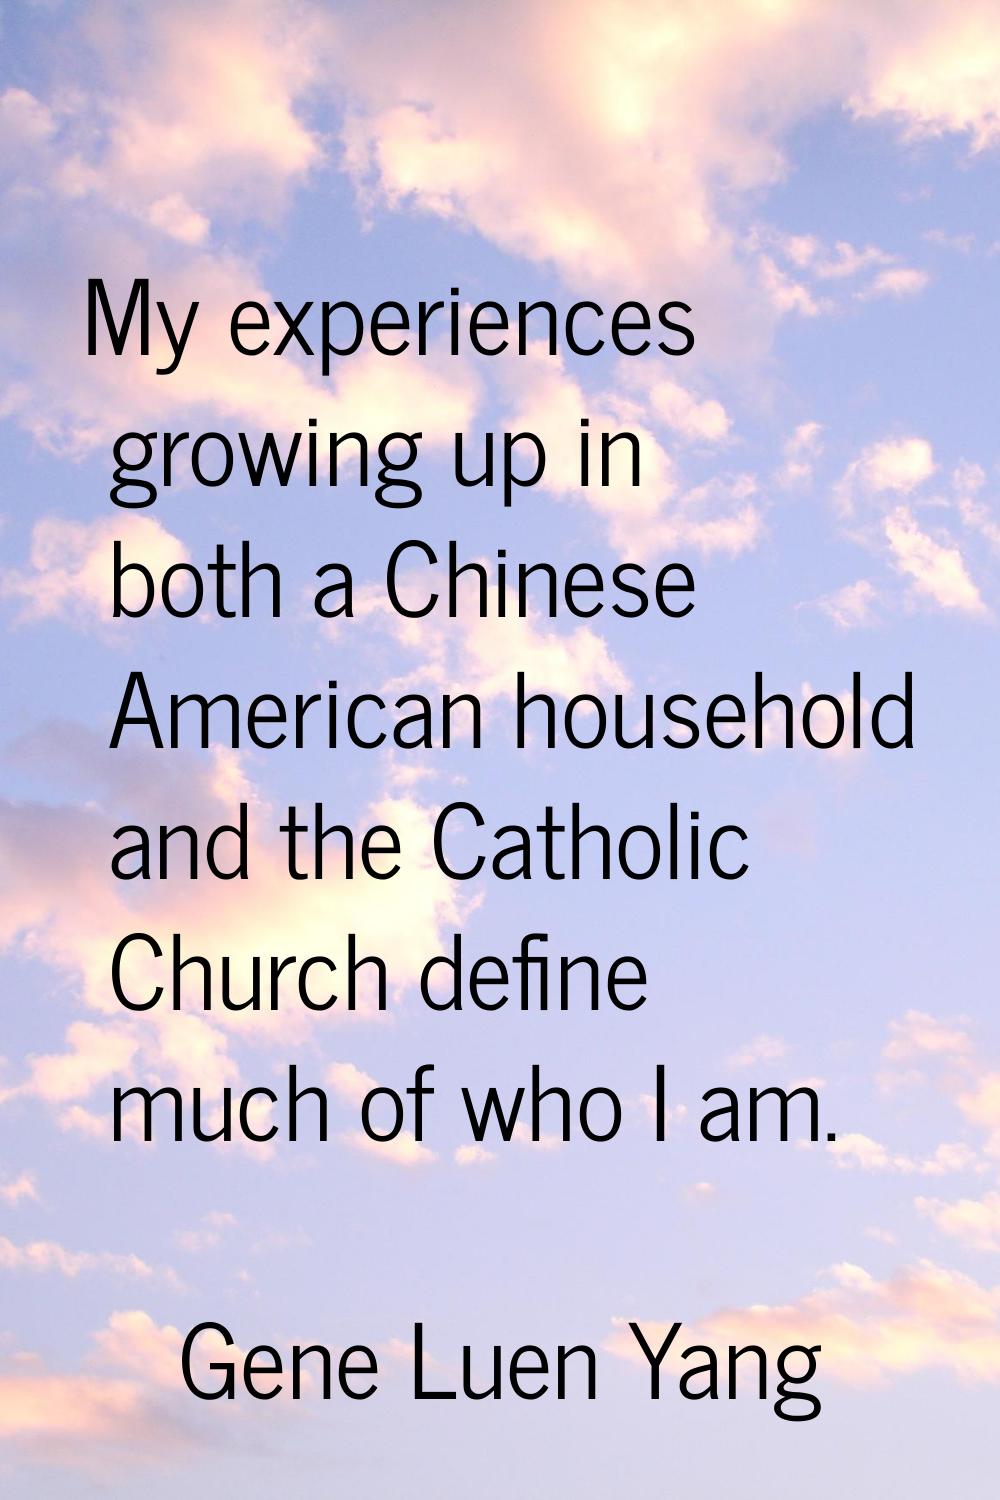 My experiences growing up in both a Chinese American household and the Catholic Church define much 